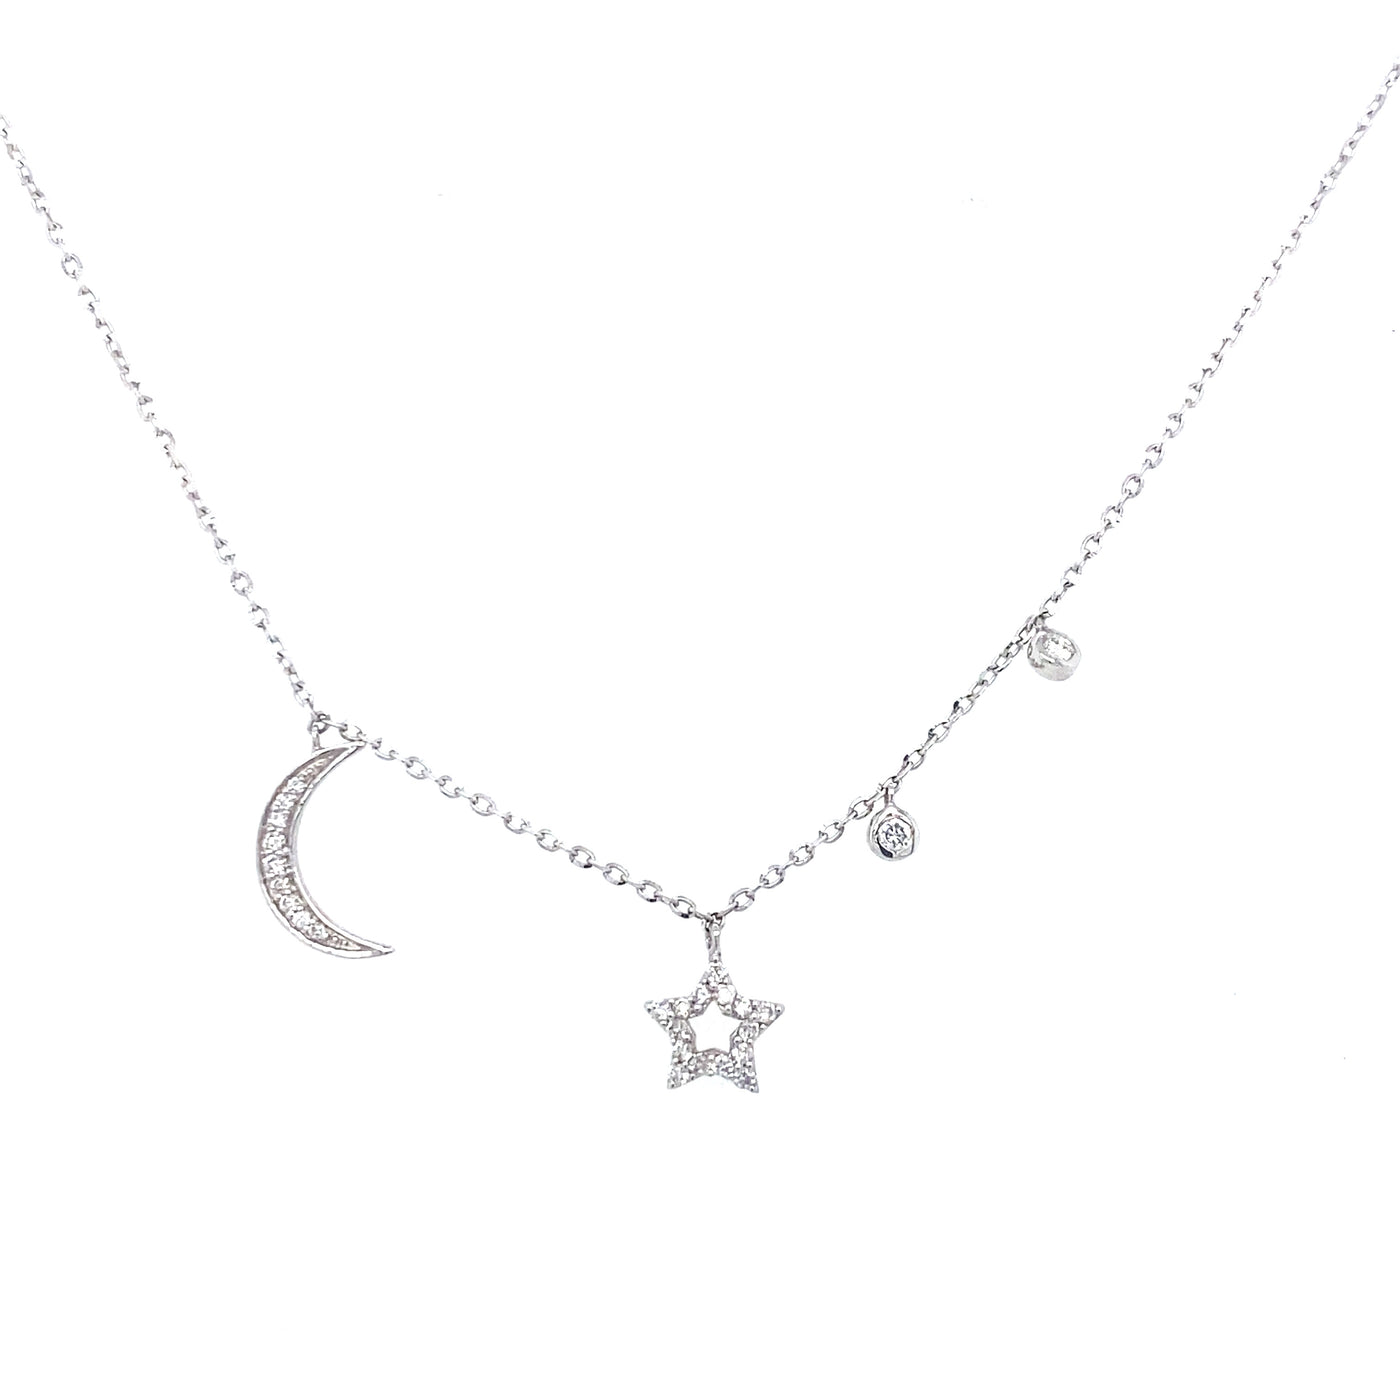 14K White Gold Diamond Star and Moon Necklace